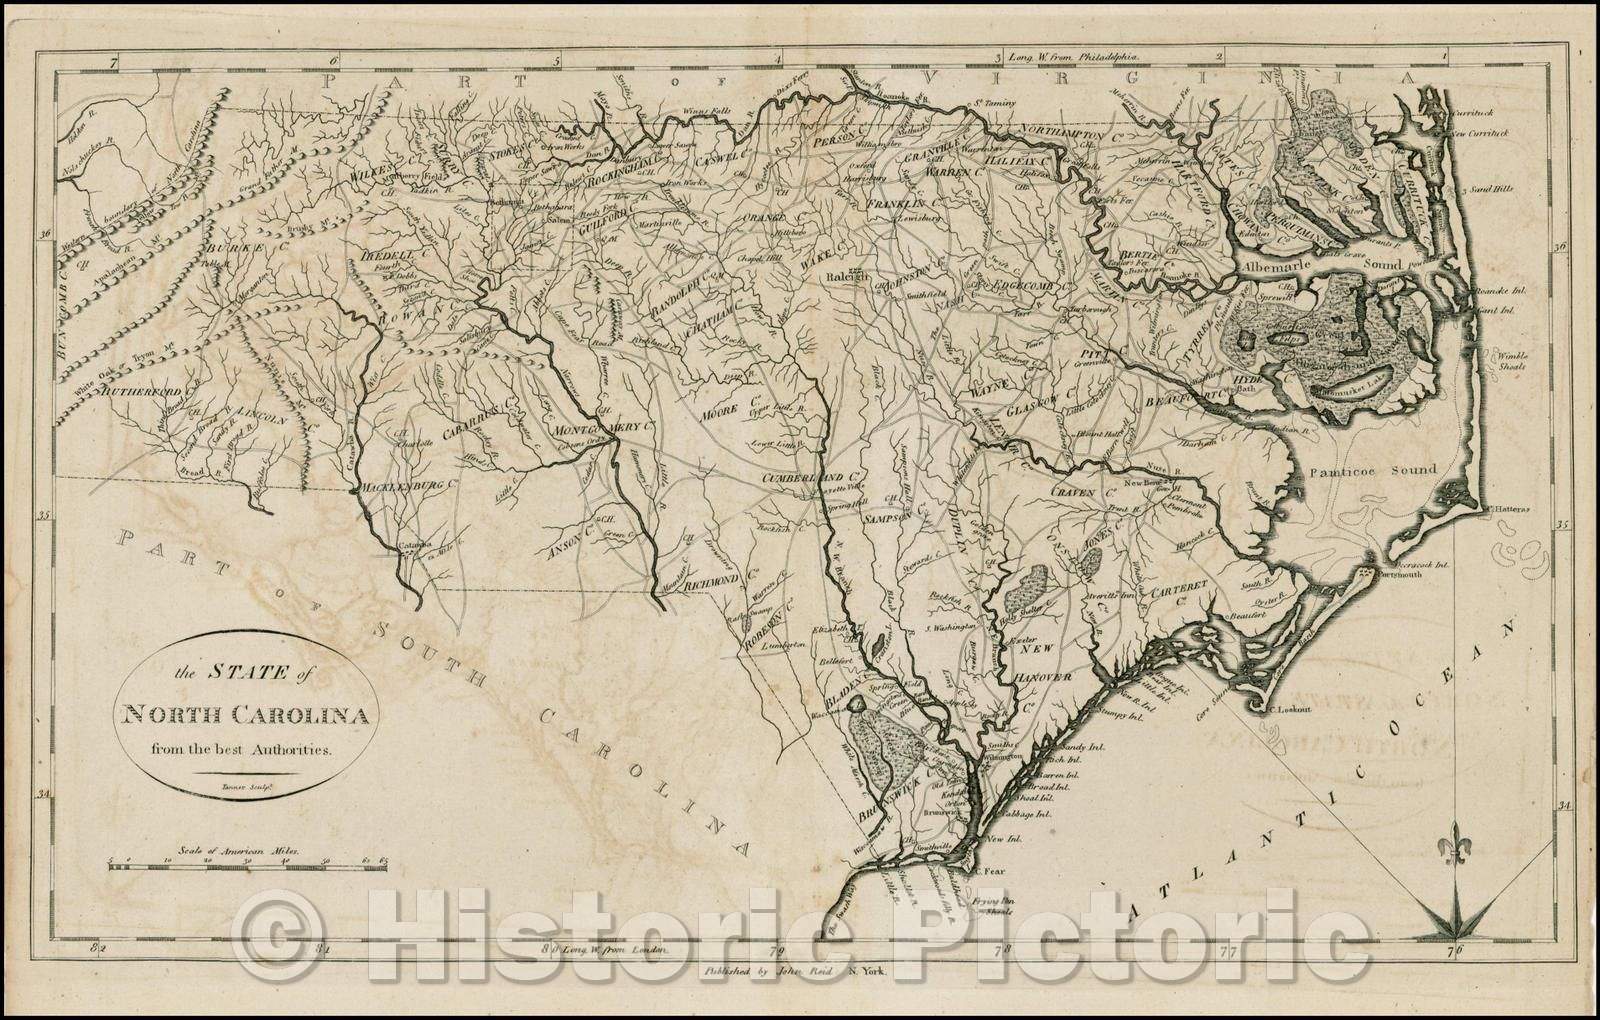 Historic Map - The State of North Carolina from the best Authorities, 1796, John Reid v3